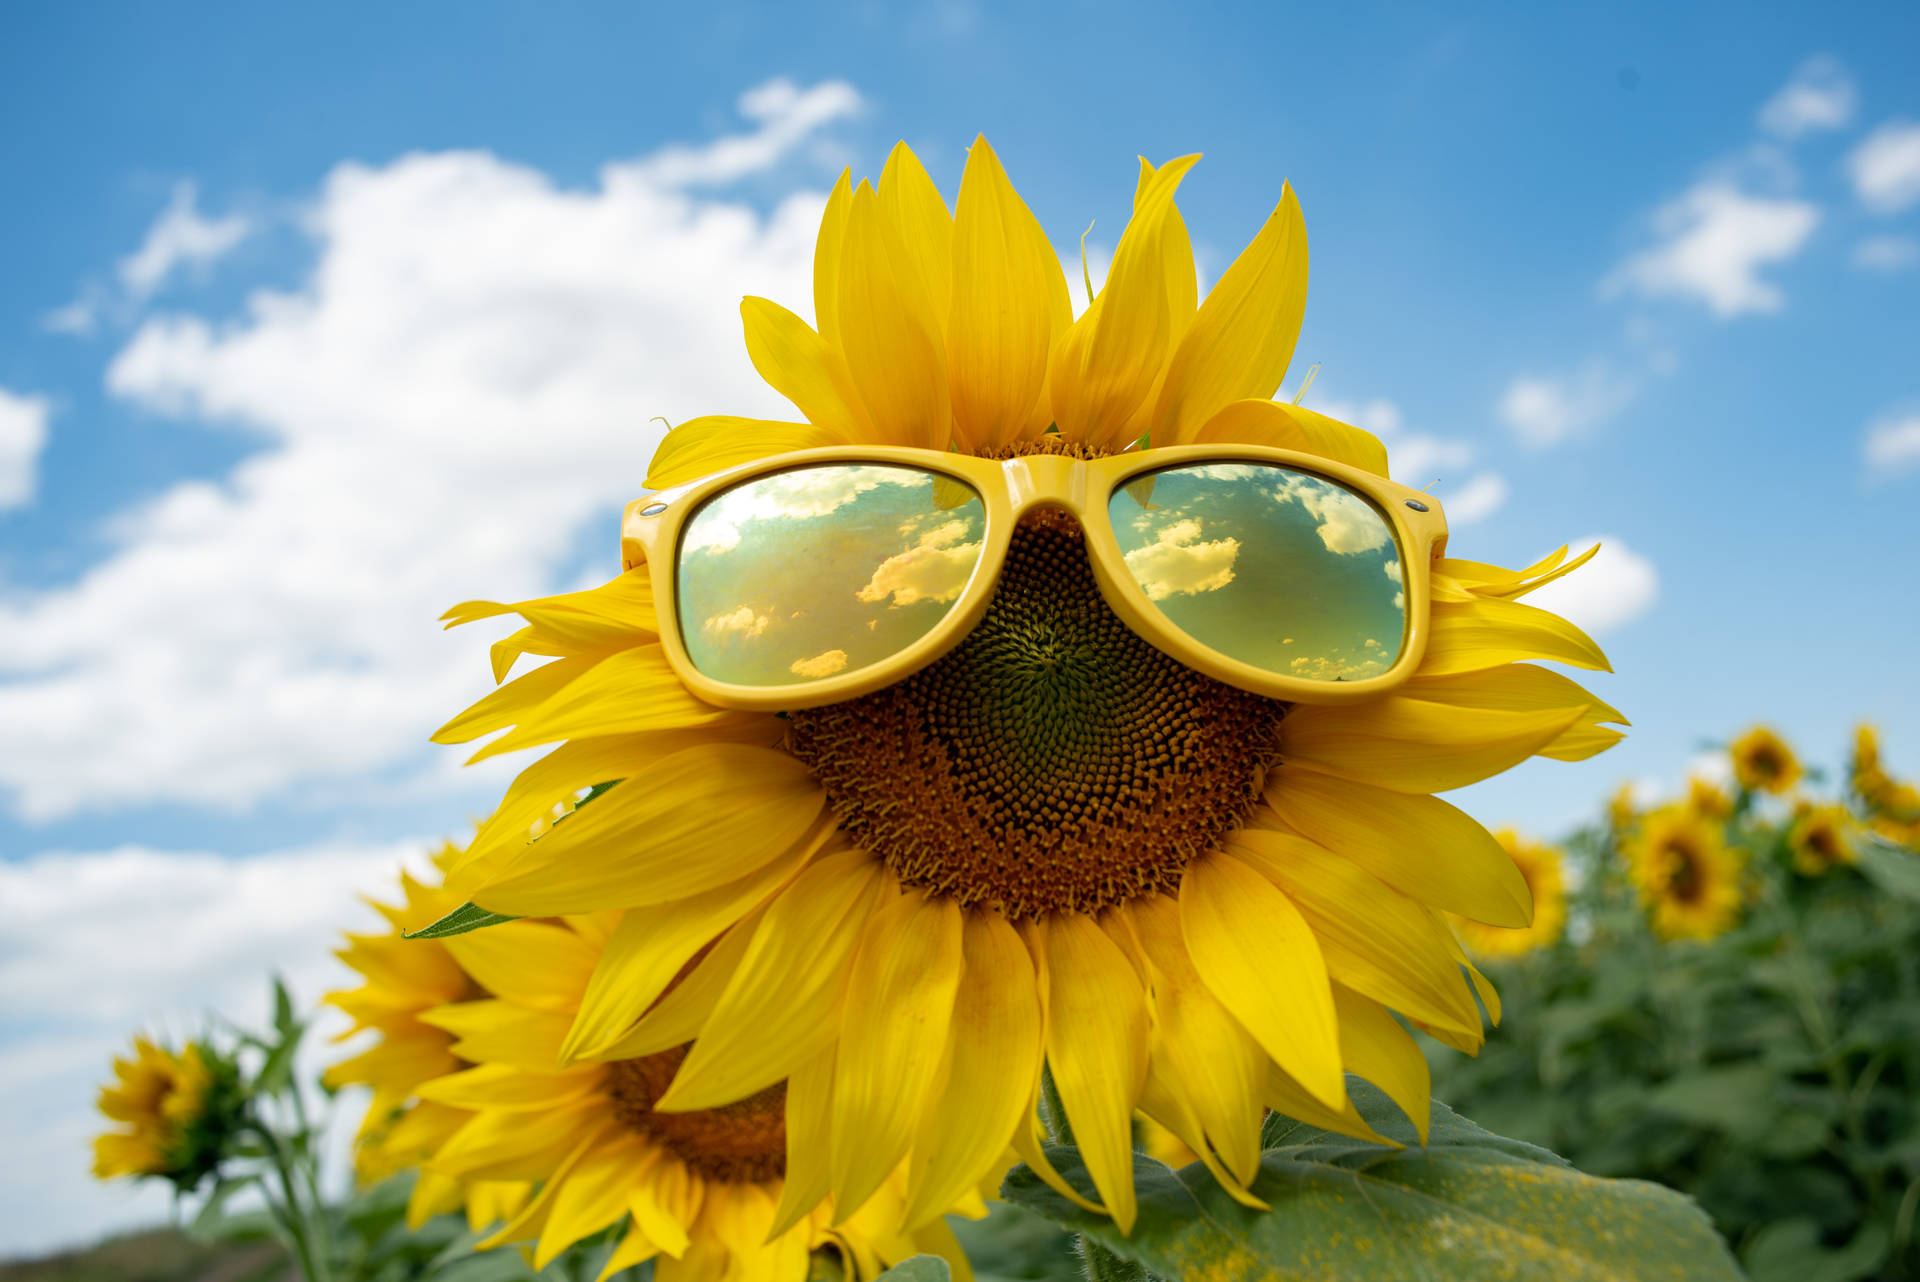 6016X4016 Sunflower Wallpaper and Background